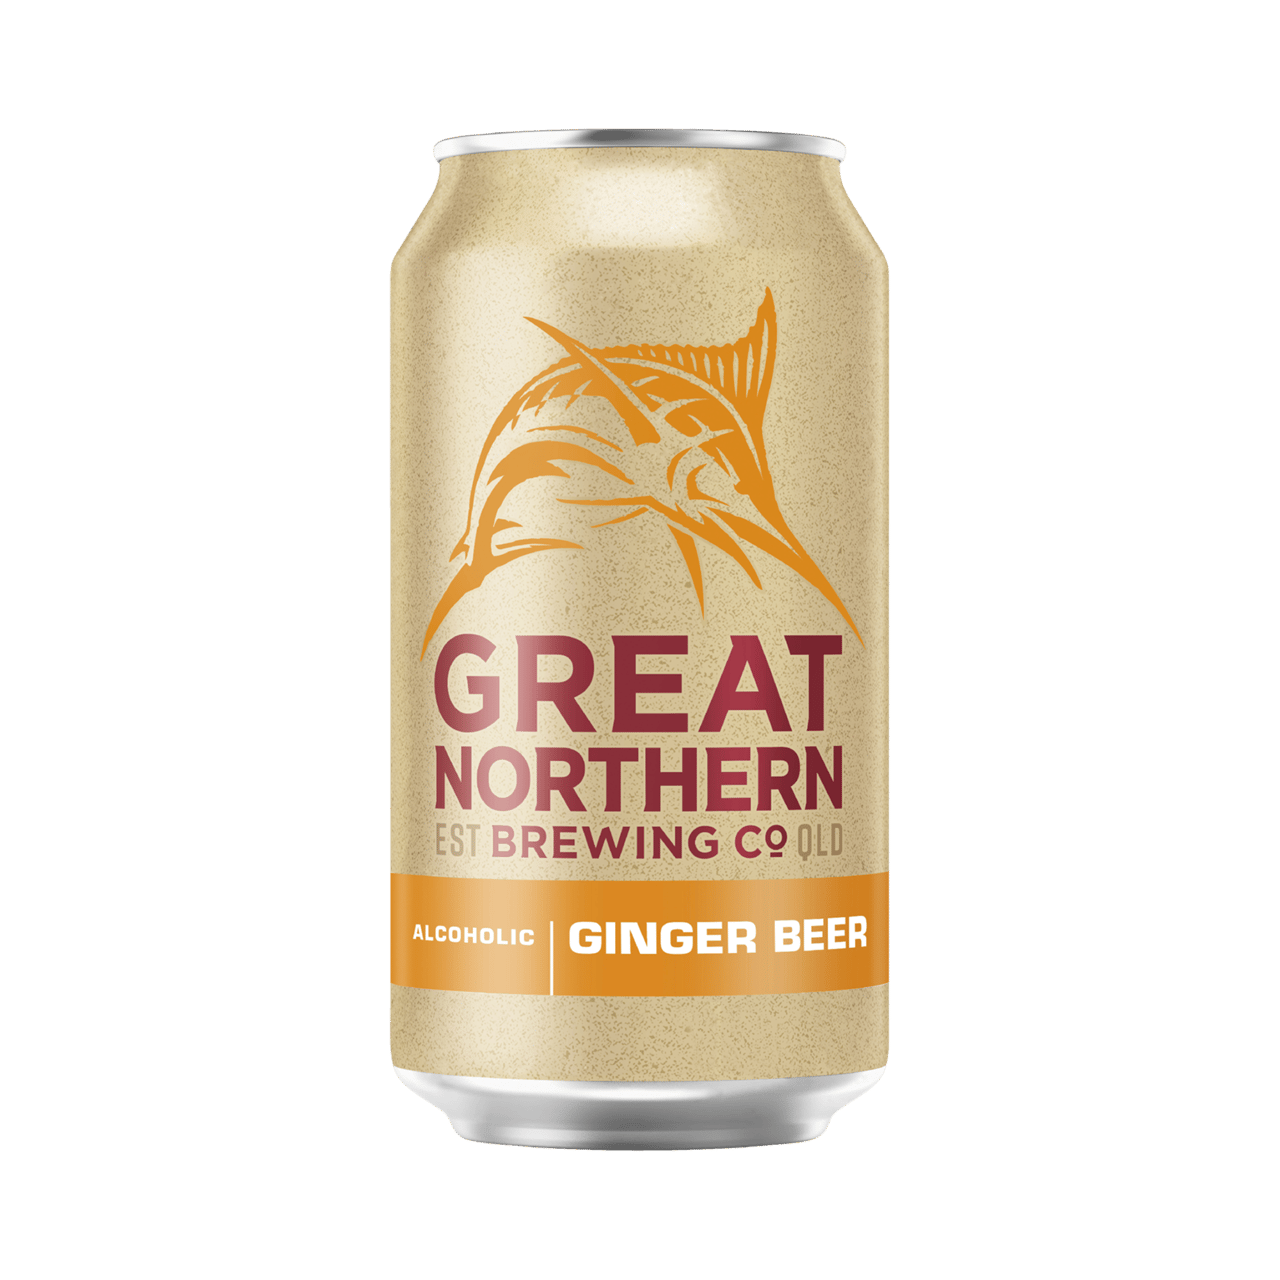 Great Northern Ginger Beer Cans 375ml – Boozeit.com.au